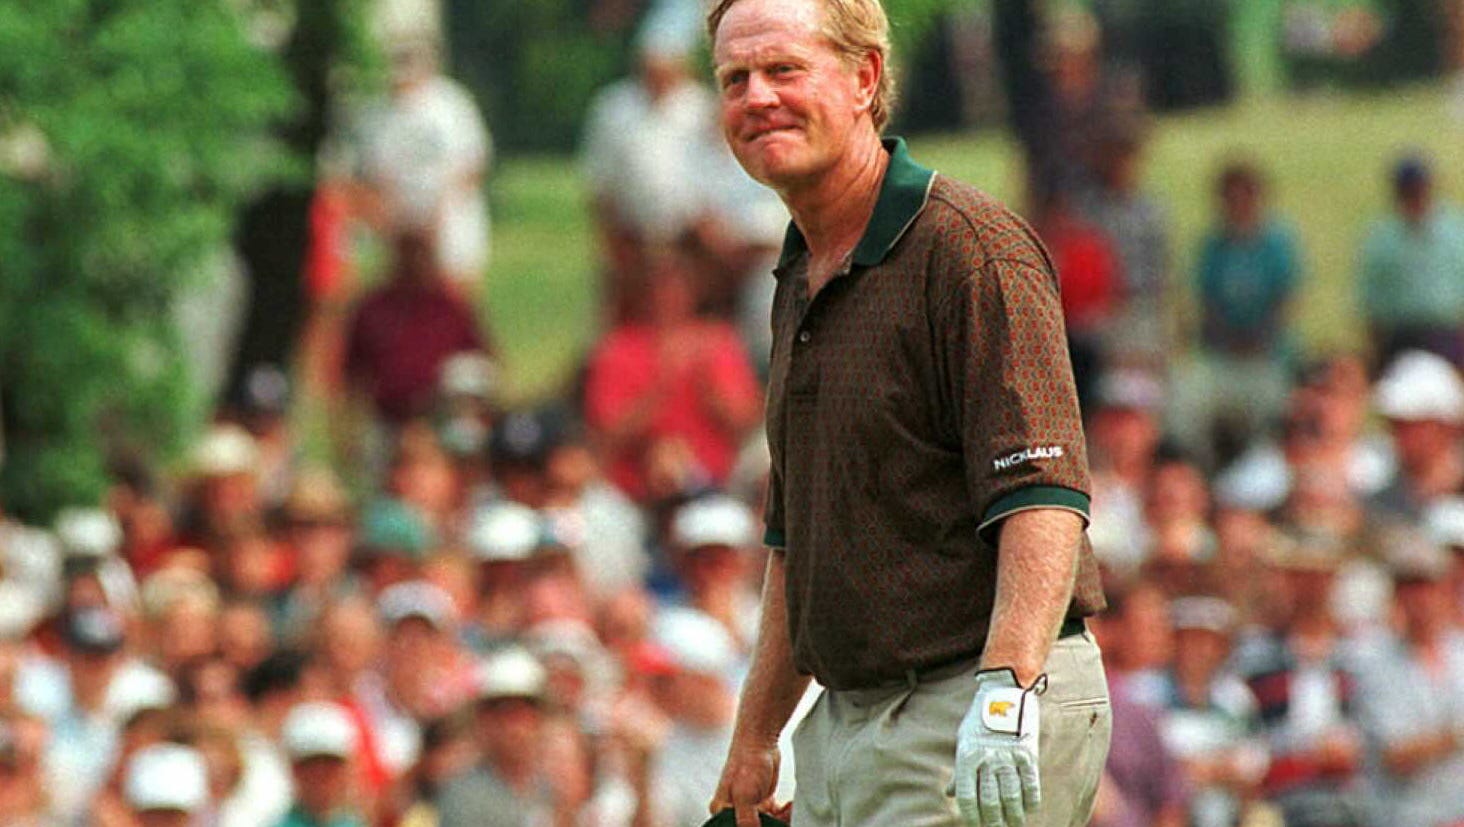 Jack Nicklaus looks to the gallery after the conclusion of his 40th U.S. Open, in 2006, at Oakland Hills Country Club.